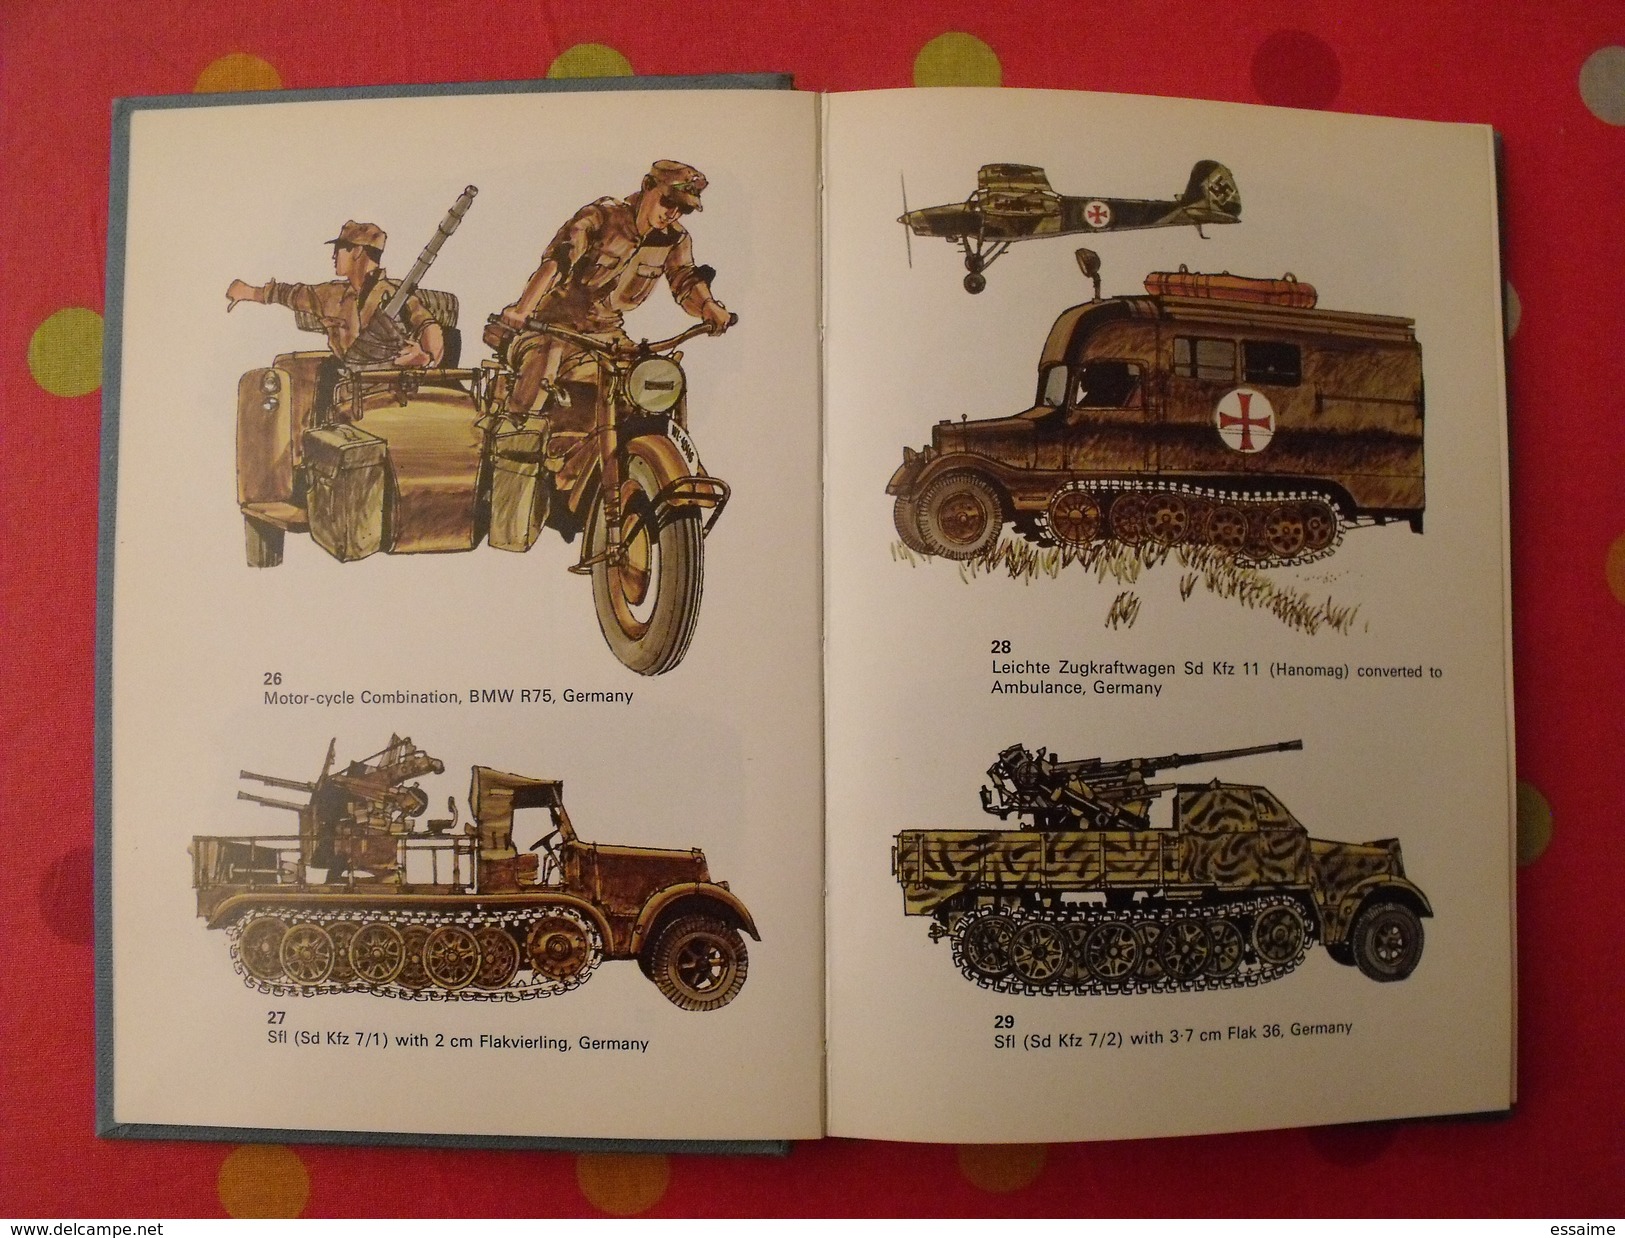 Military Transport Of World War II. Camions Militaires. Bishop. 1975. En Anglais. Guerre 39-45. Blandford - Books On Collecting